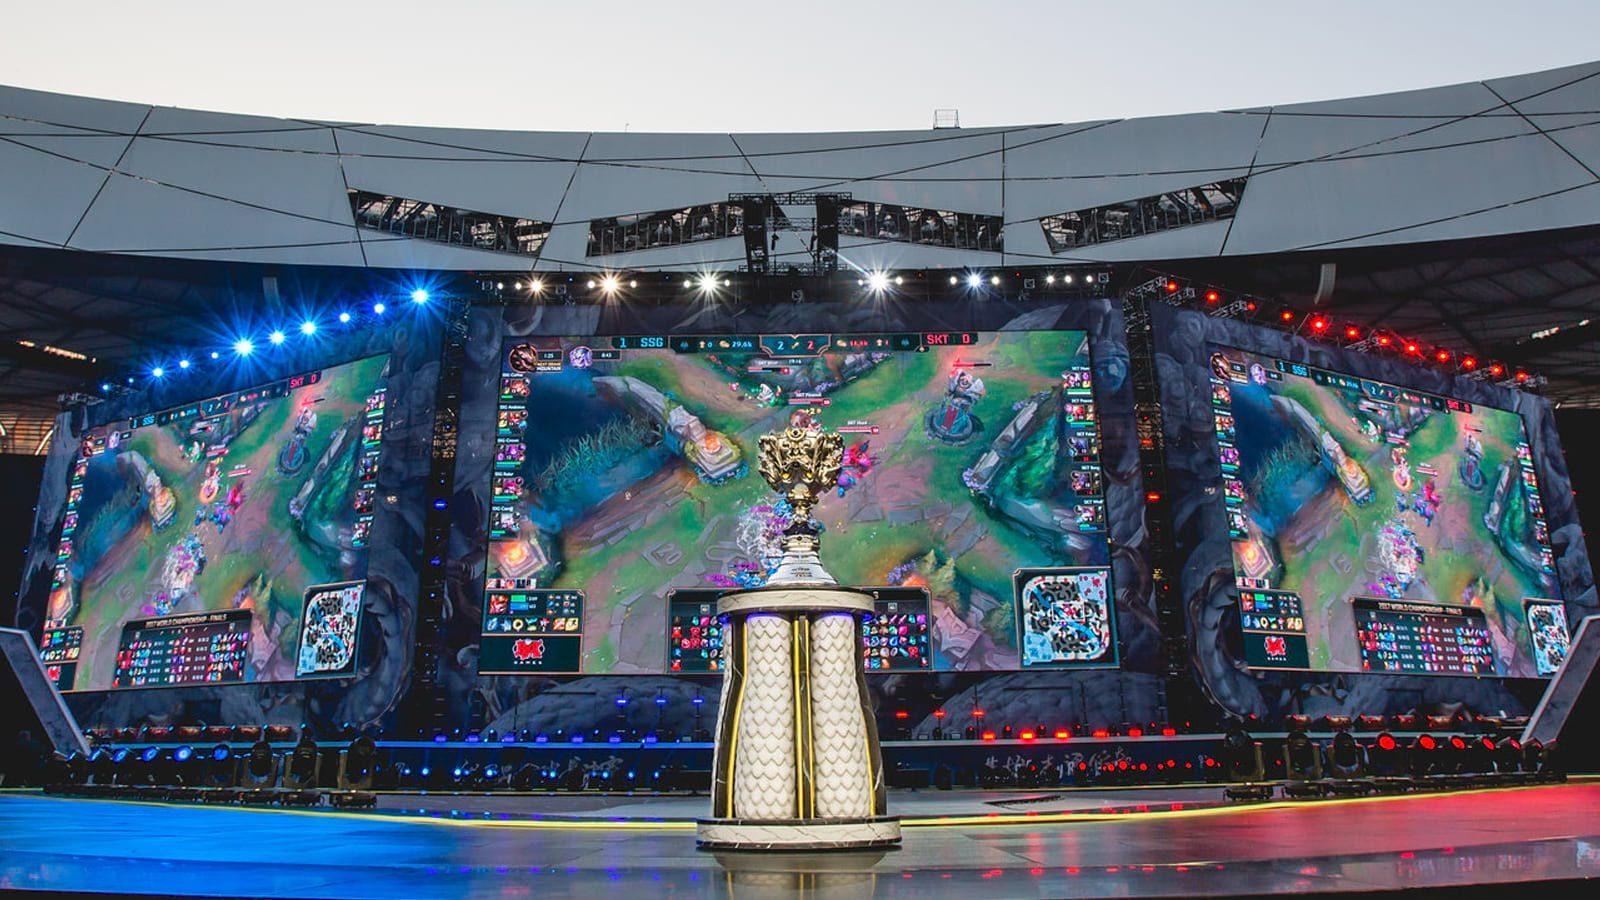 Invictus Gaming wins 2018 League of Legends World Championship - The Rift  Herald